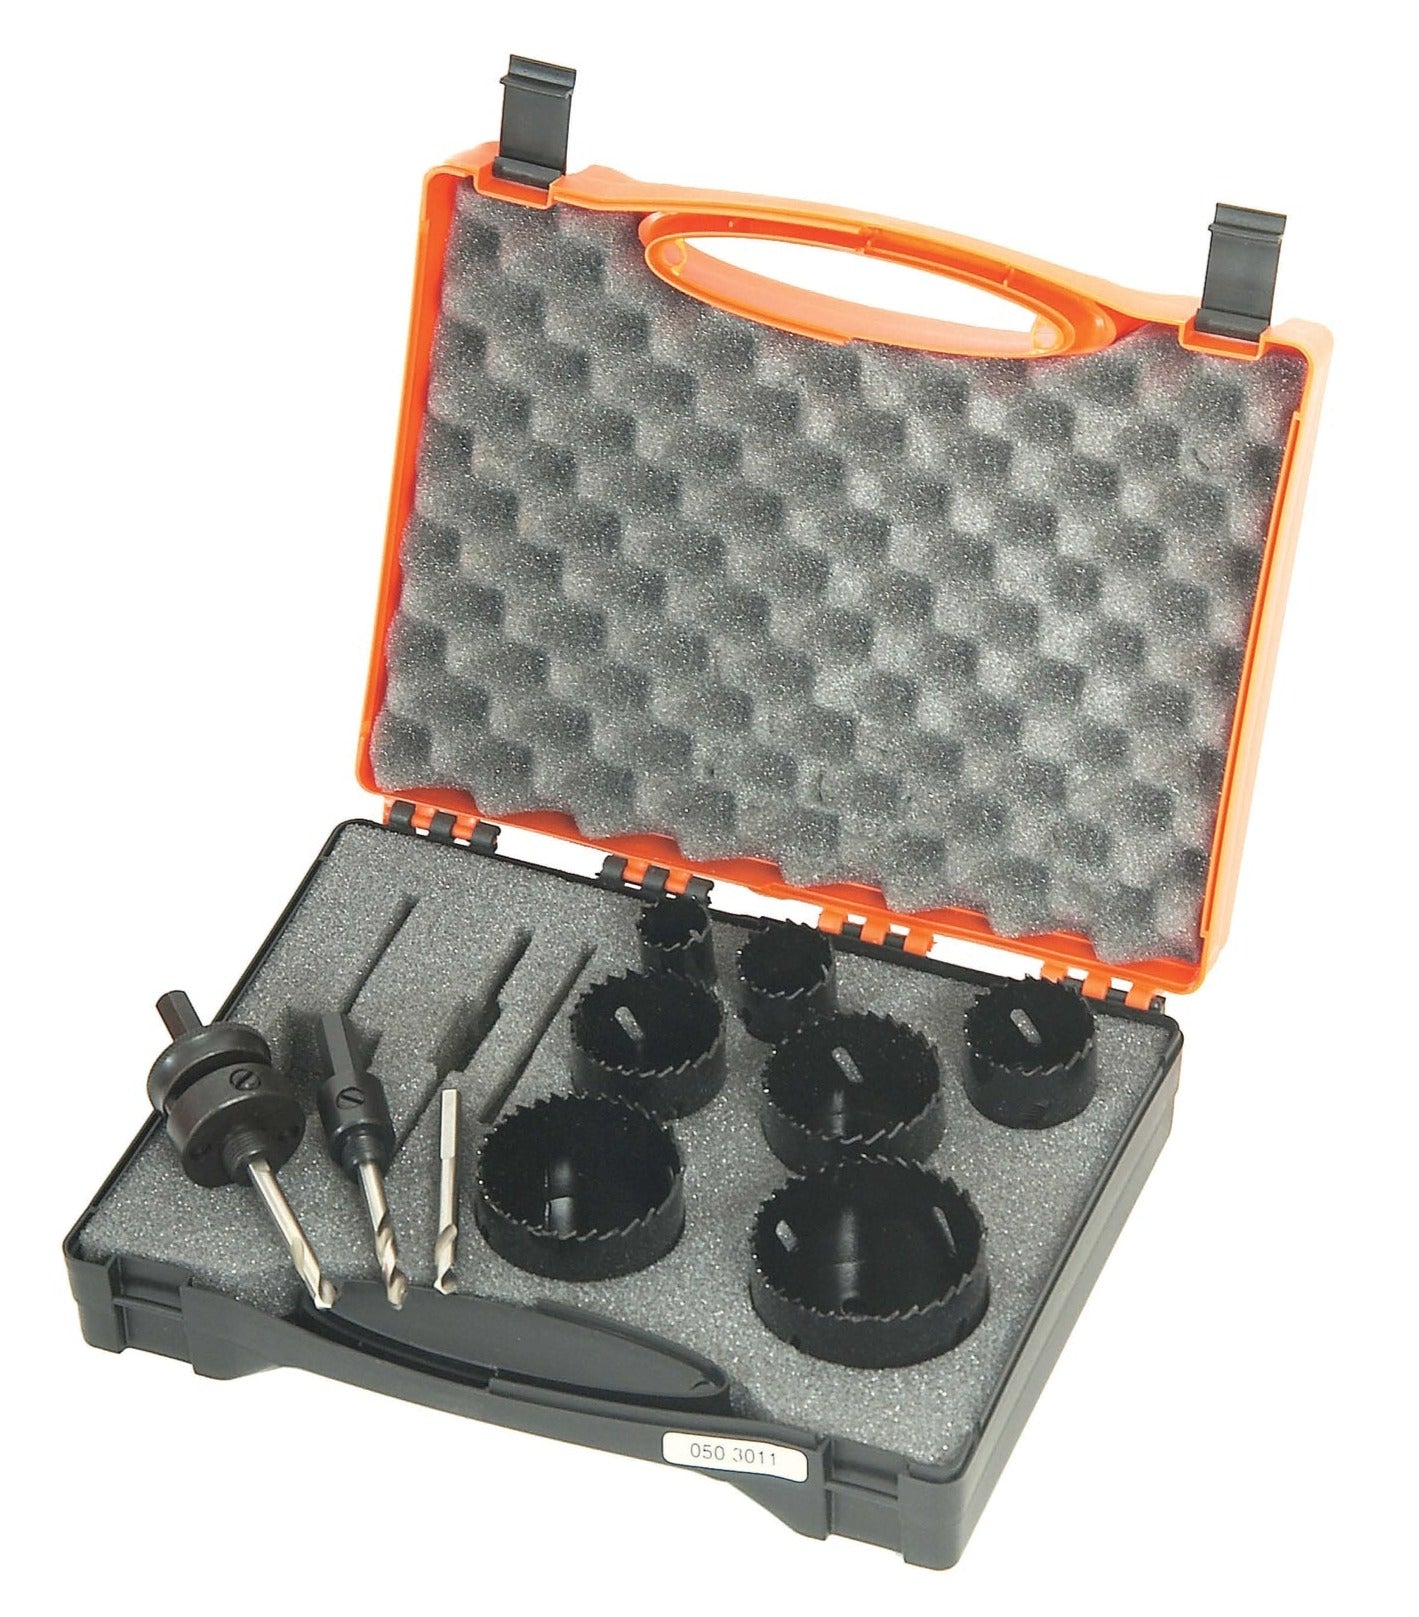 Hole Saw Kit 10Pce All Purpose Plumbers 050311 by Excision